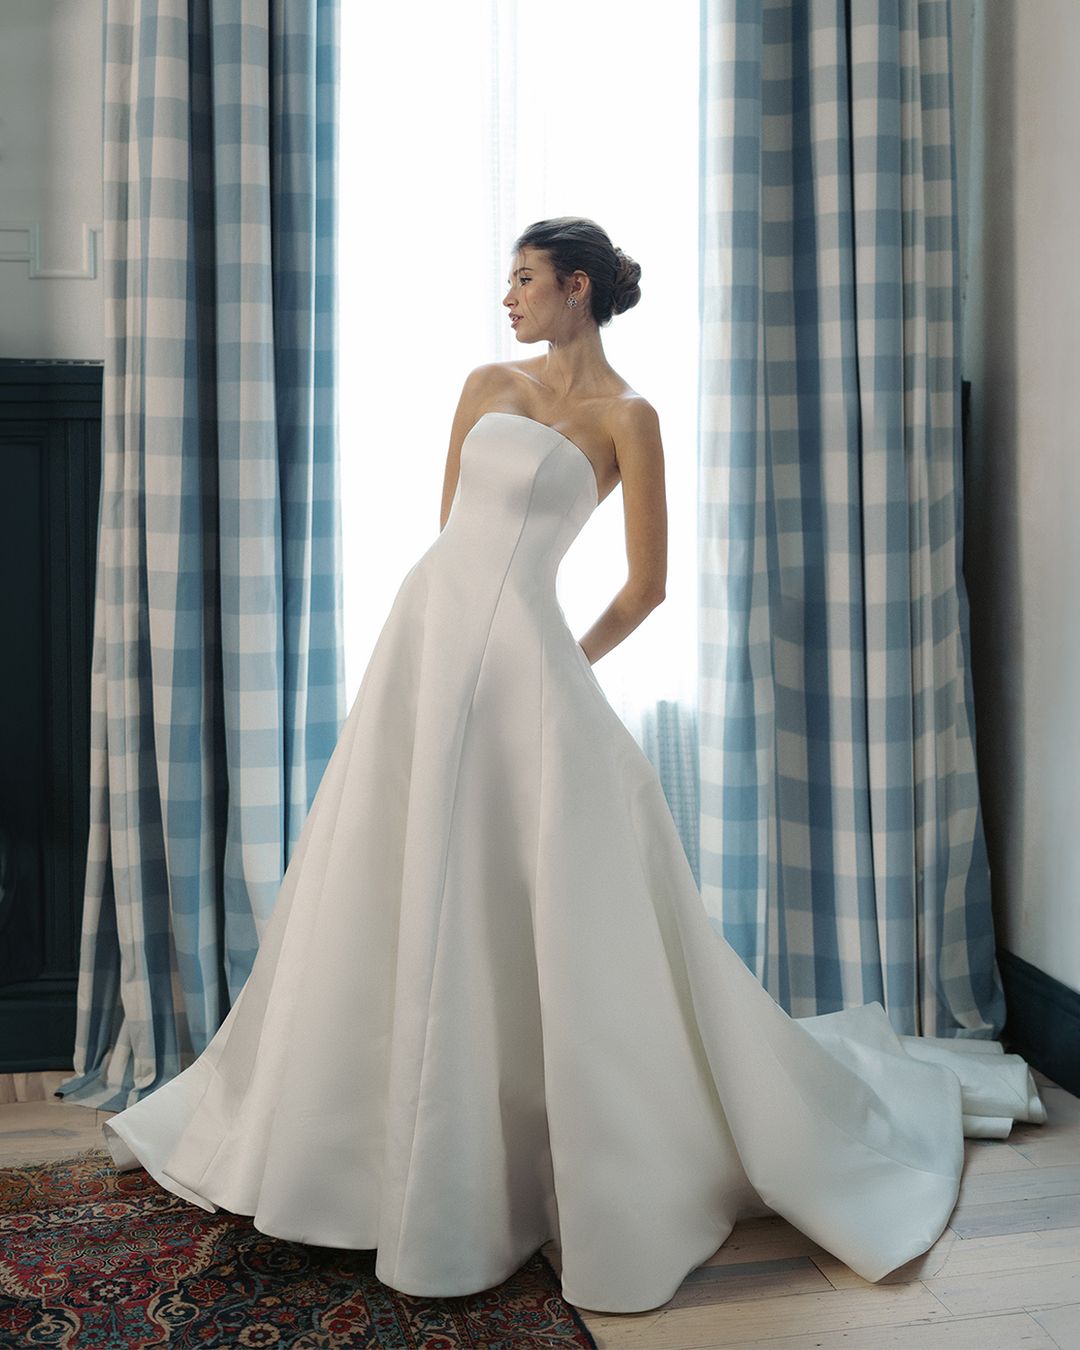 An A-line gown with an arched neckline and train